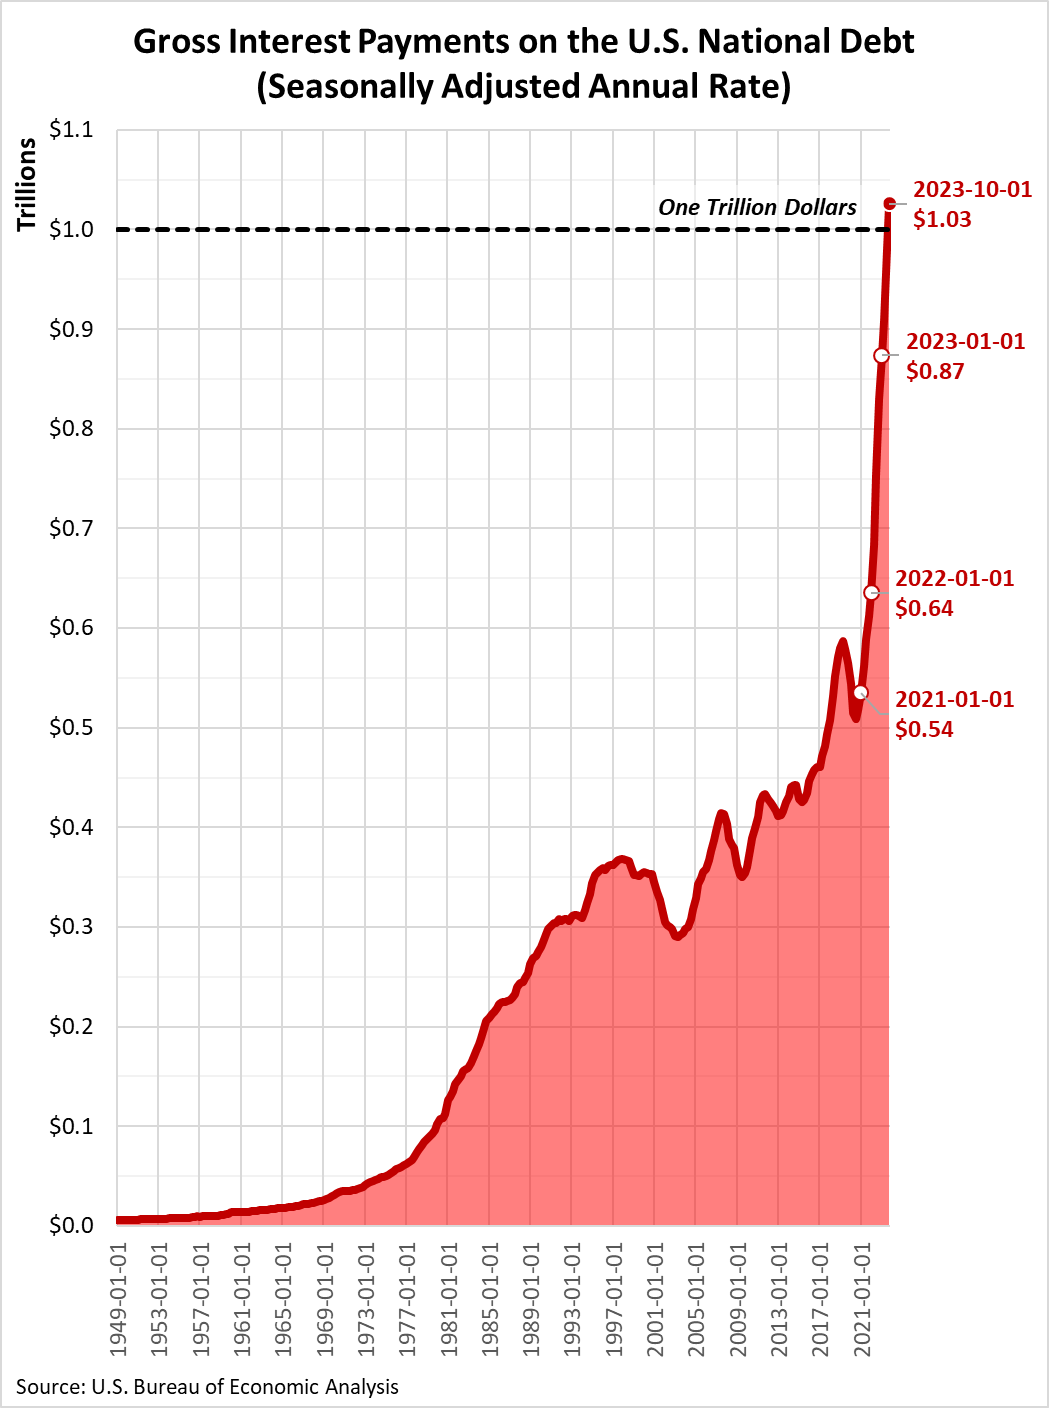 Gross Interest Payments on the U.S. National Debt, 1949Q1 to 2023Q4